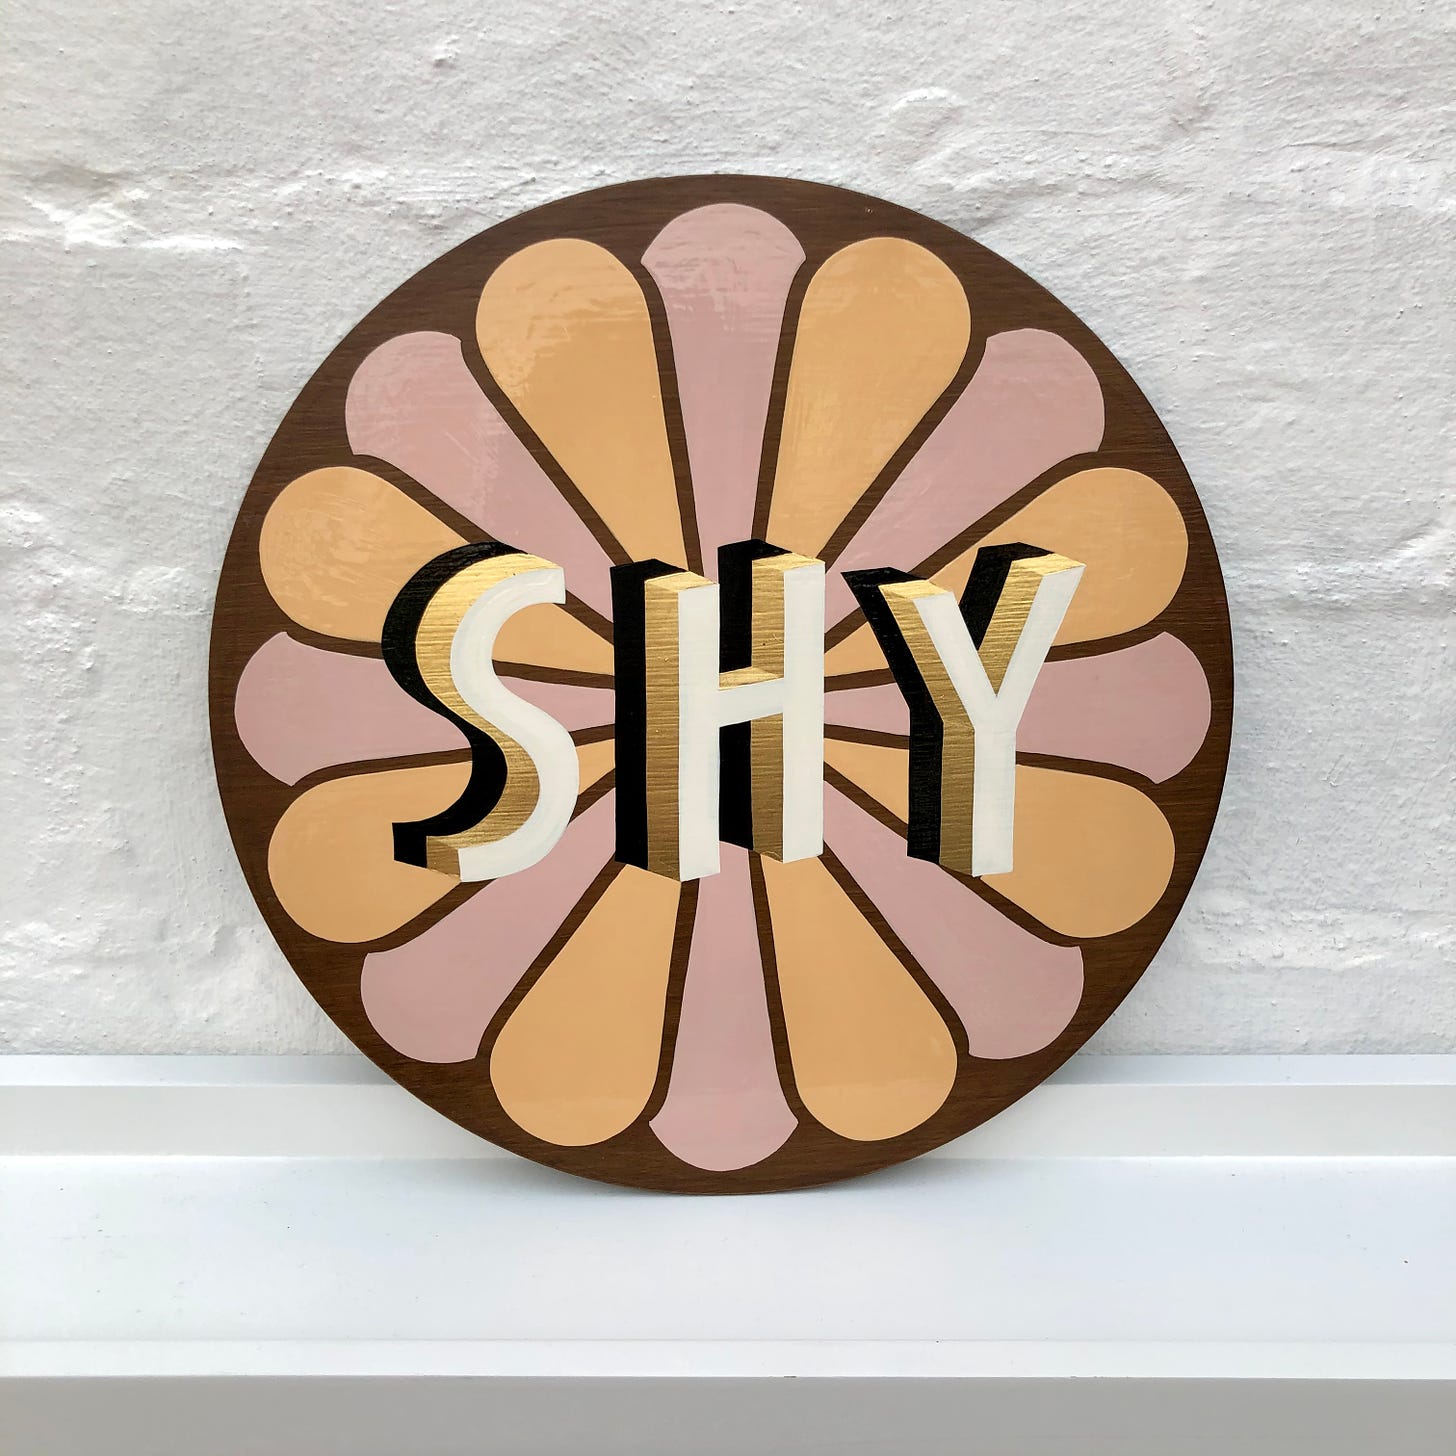 a handpainted circular sign with pink and orange petal shapes, as well as a black gold and white shadowworked lettering reading SHY. Its propped up against a white brick wall